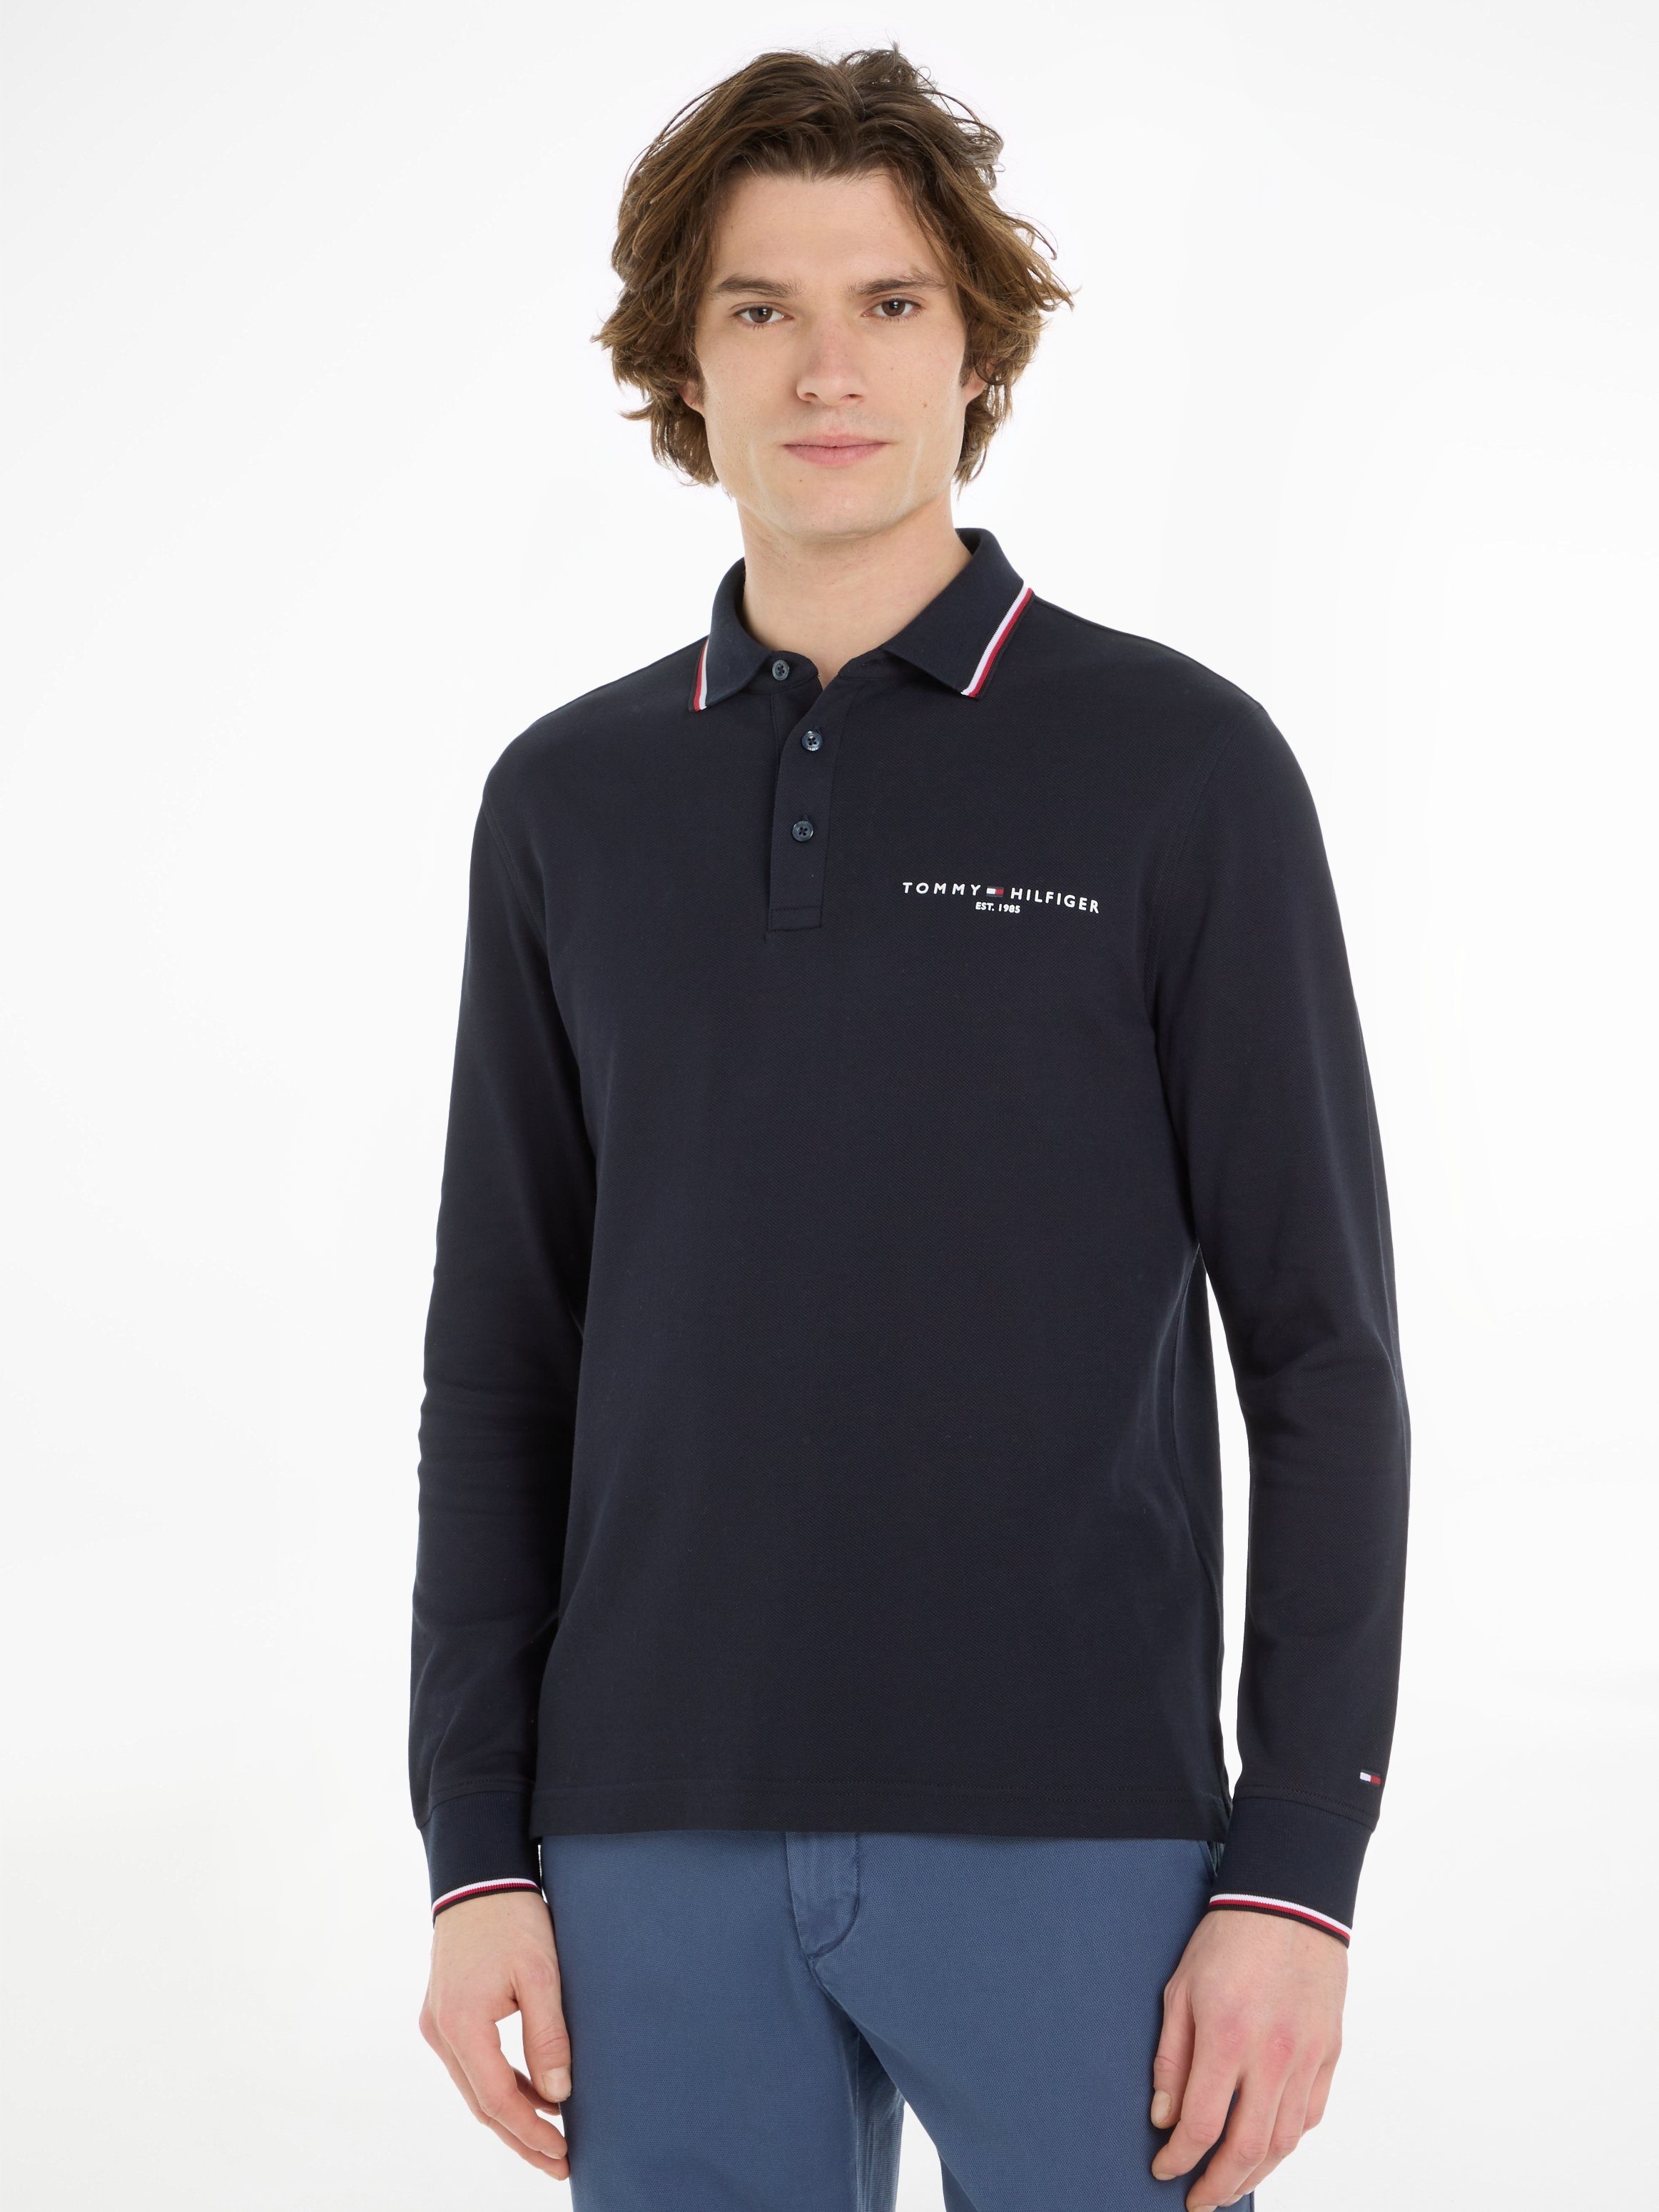 L/S SLIM TIPPED PLACE Hilfiger Langarm-Poloshirt Tommy POLO